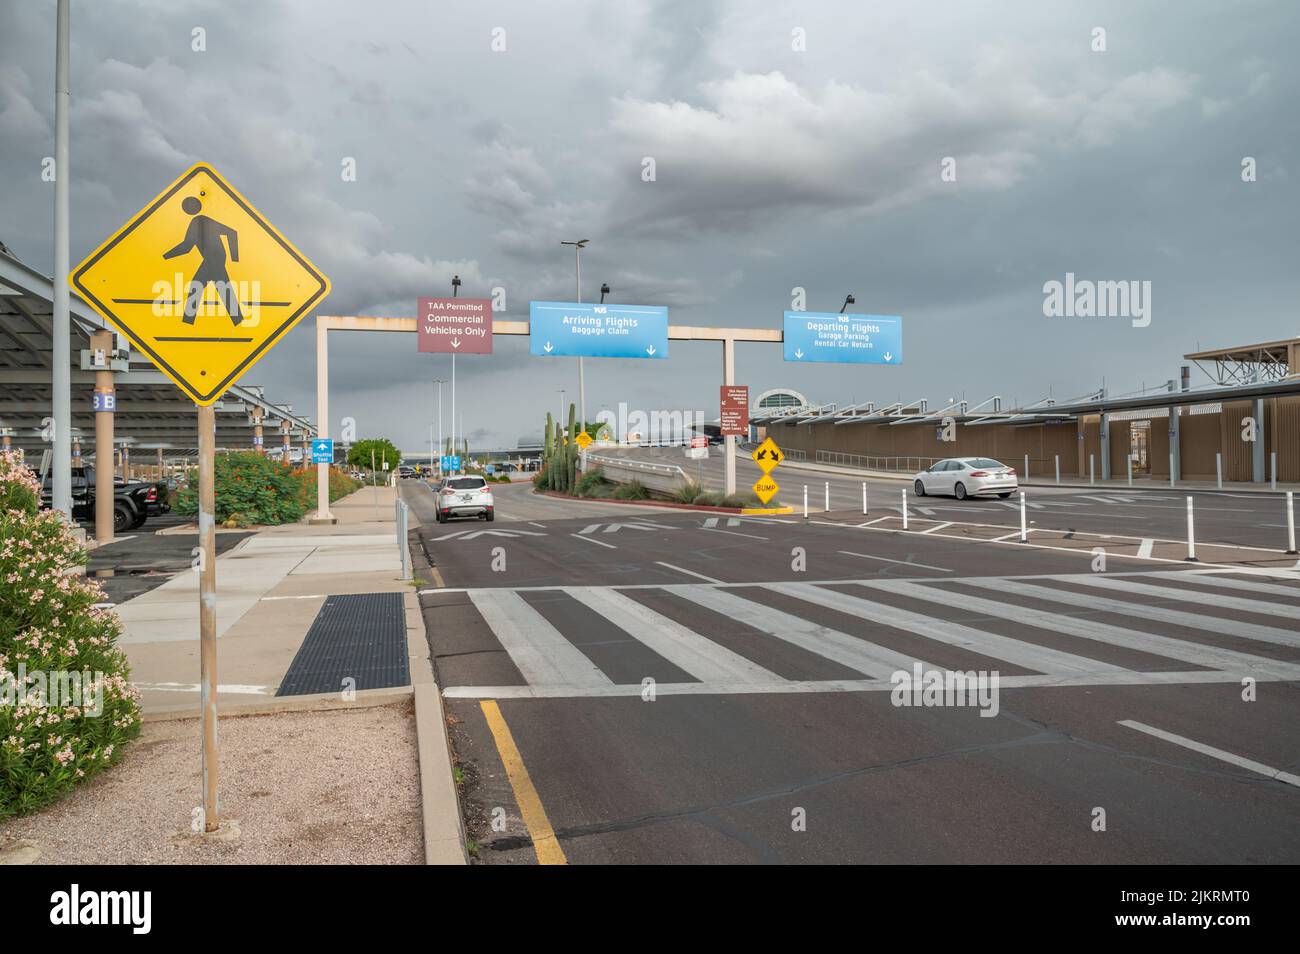 Vehicles arrive at Tucson International Airport next to parking lot. Directional signs display. Stock Photo